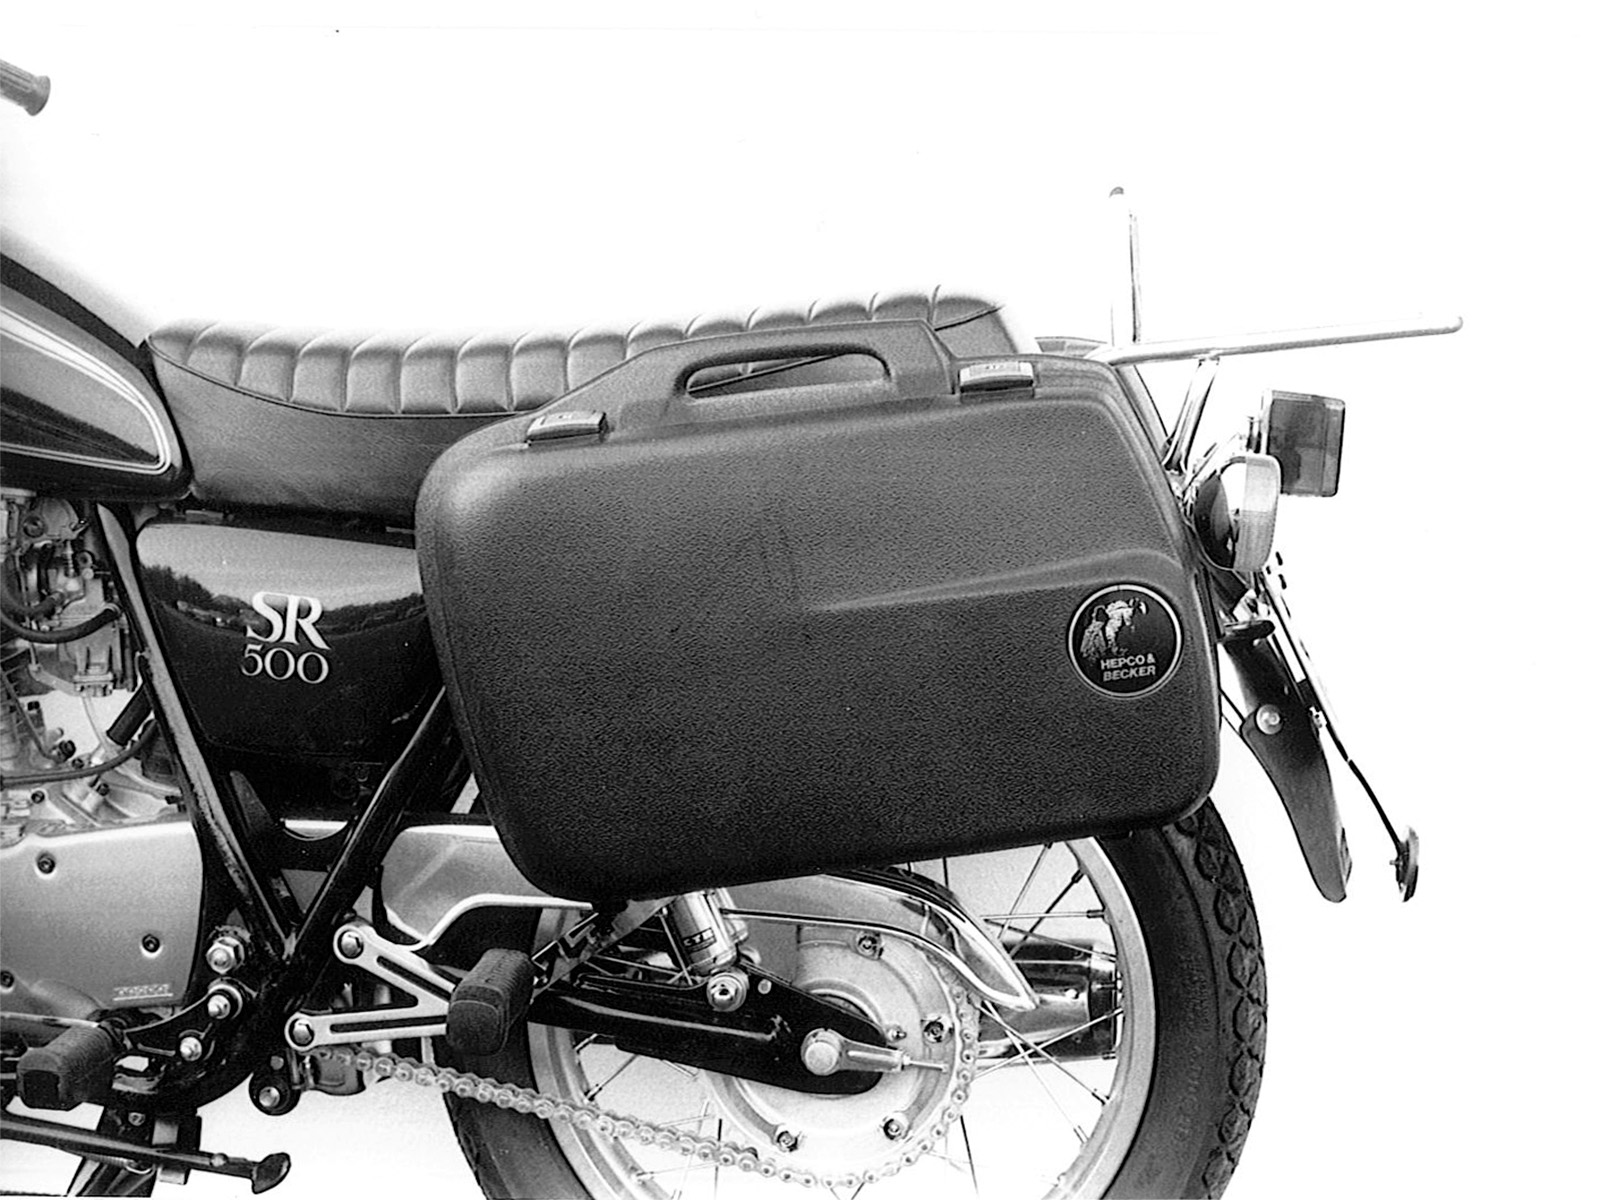 Complete carrier set (side- and topcase carrier) chrome for Yamaha SR 500 (1978-1998) (please tell year of production)